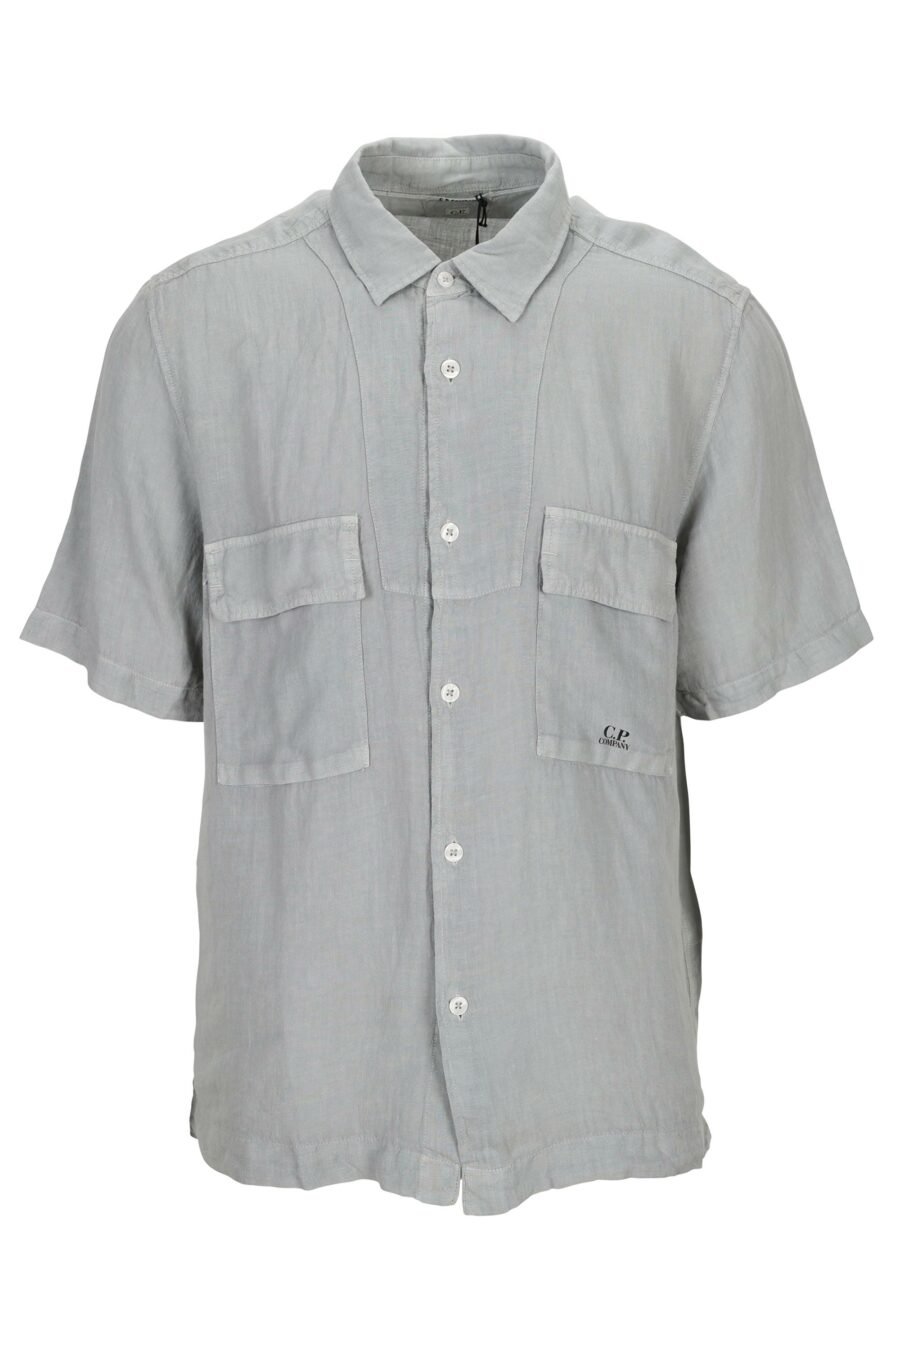 Short sleeve grey shirt with buttons and pockets with mini-logo - 7620943668773